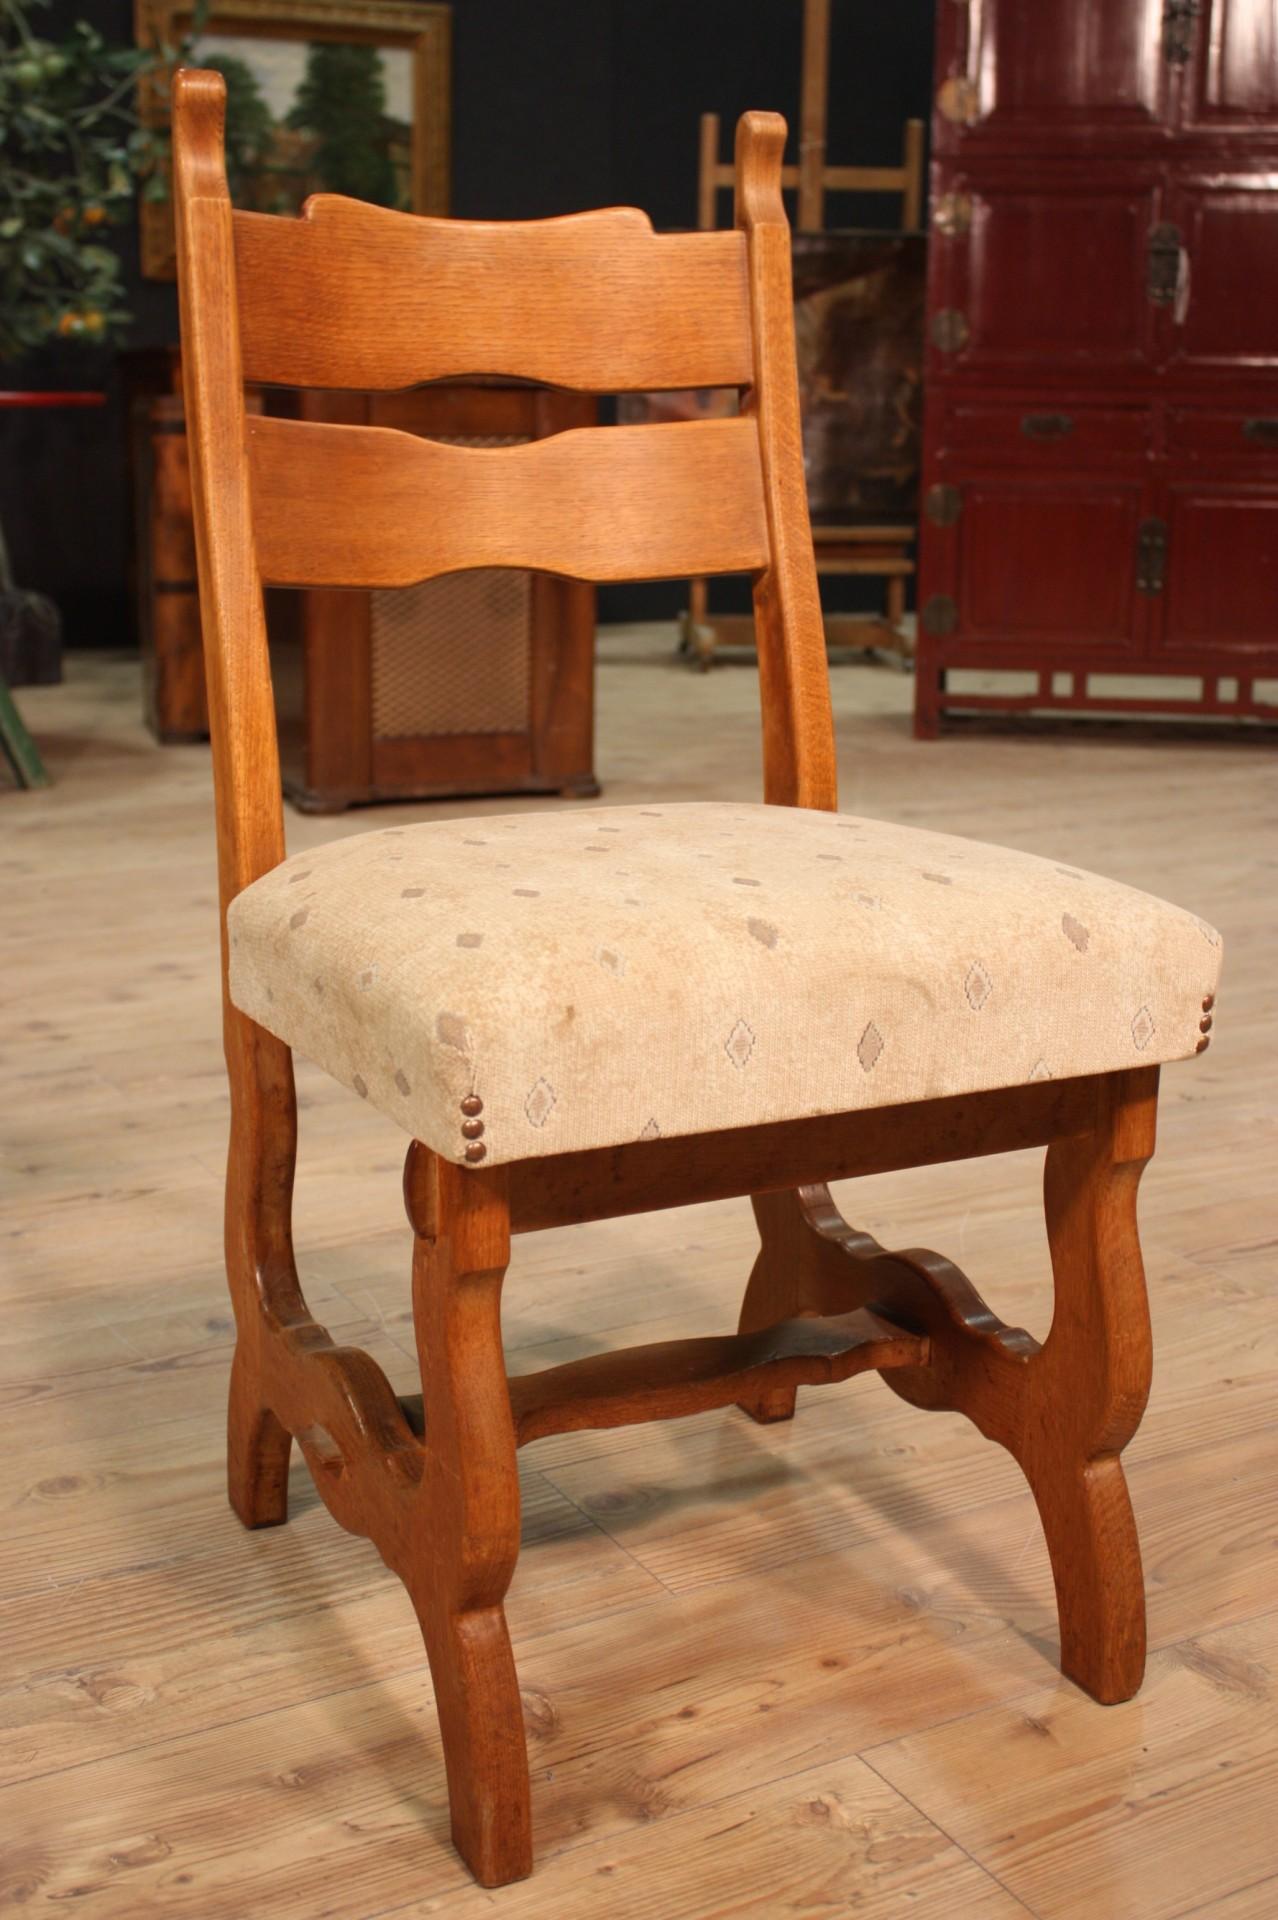 Group of 4 Rustic Northern European Chairs, 20th Century For Sale 8